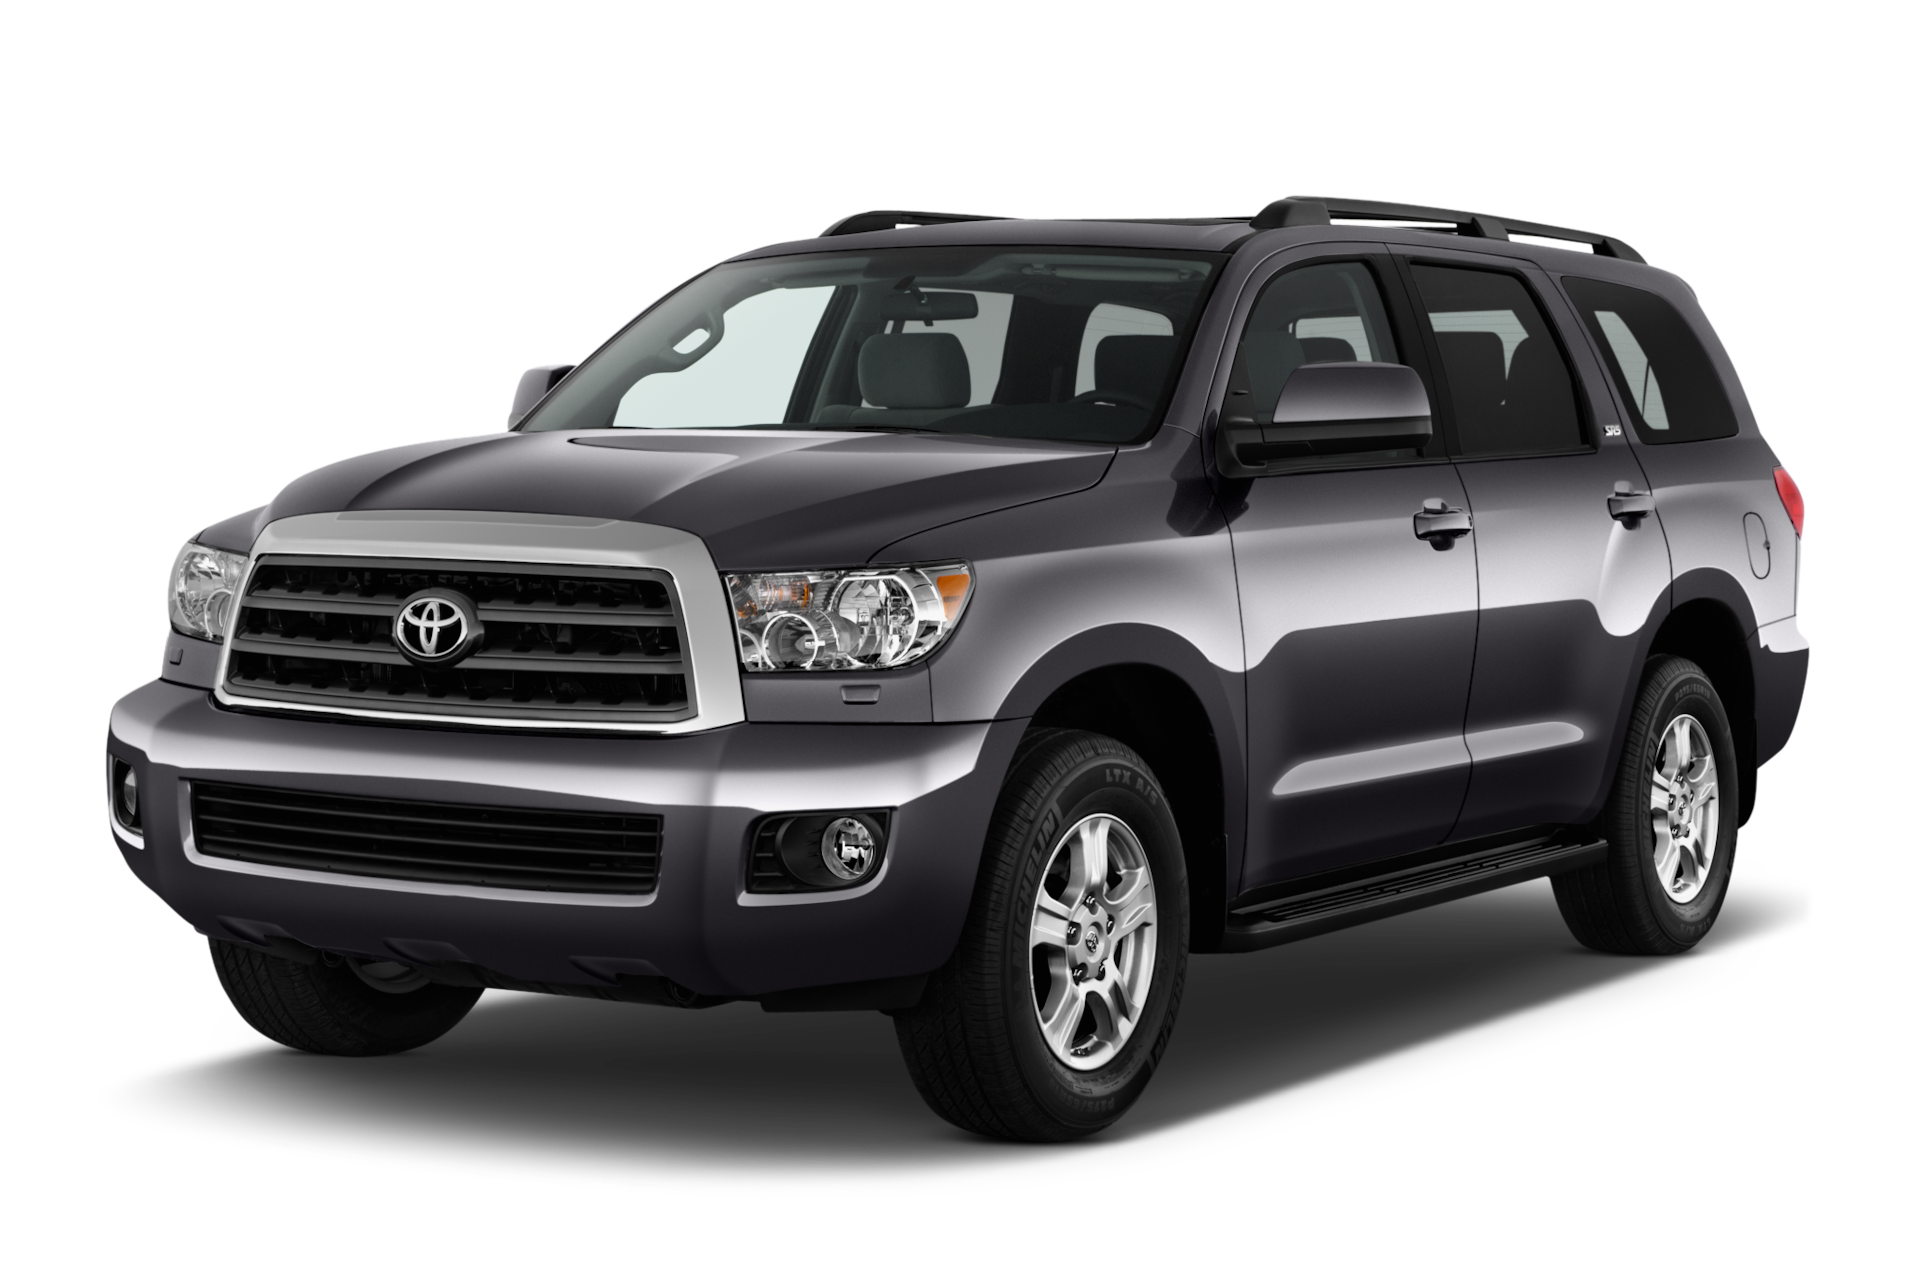 2016 Toyota Sequoia Prices, Reviews, and Photos - MotorTrend